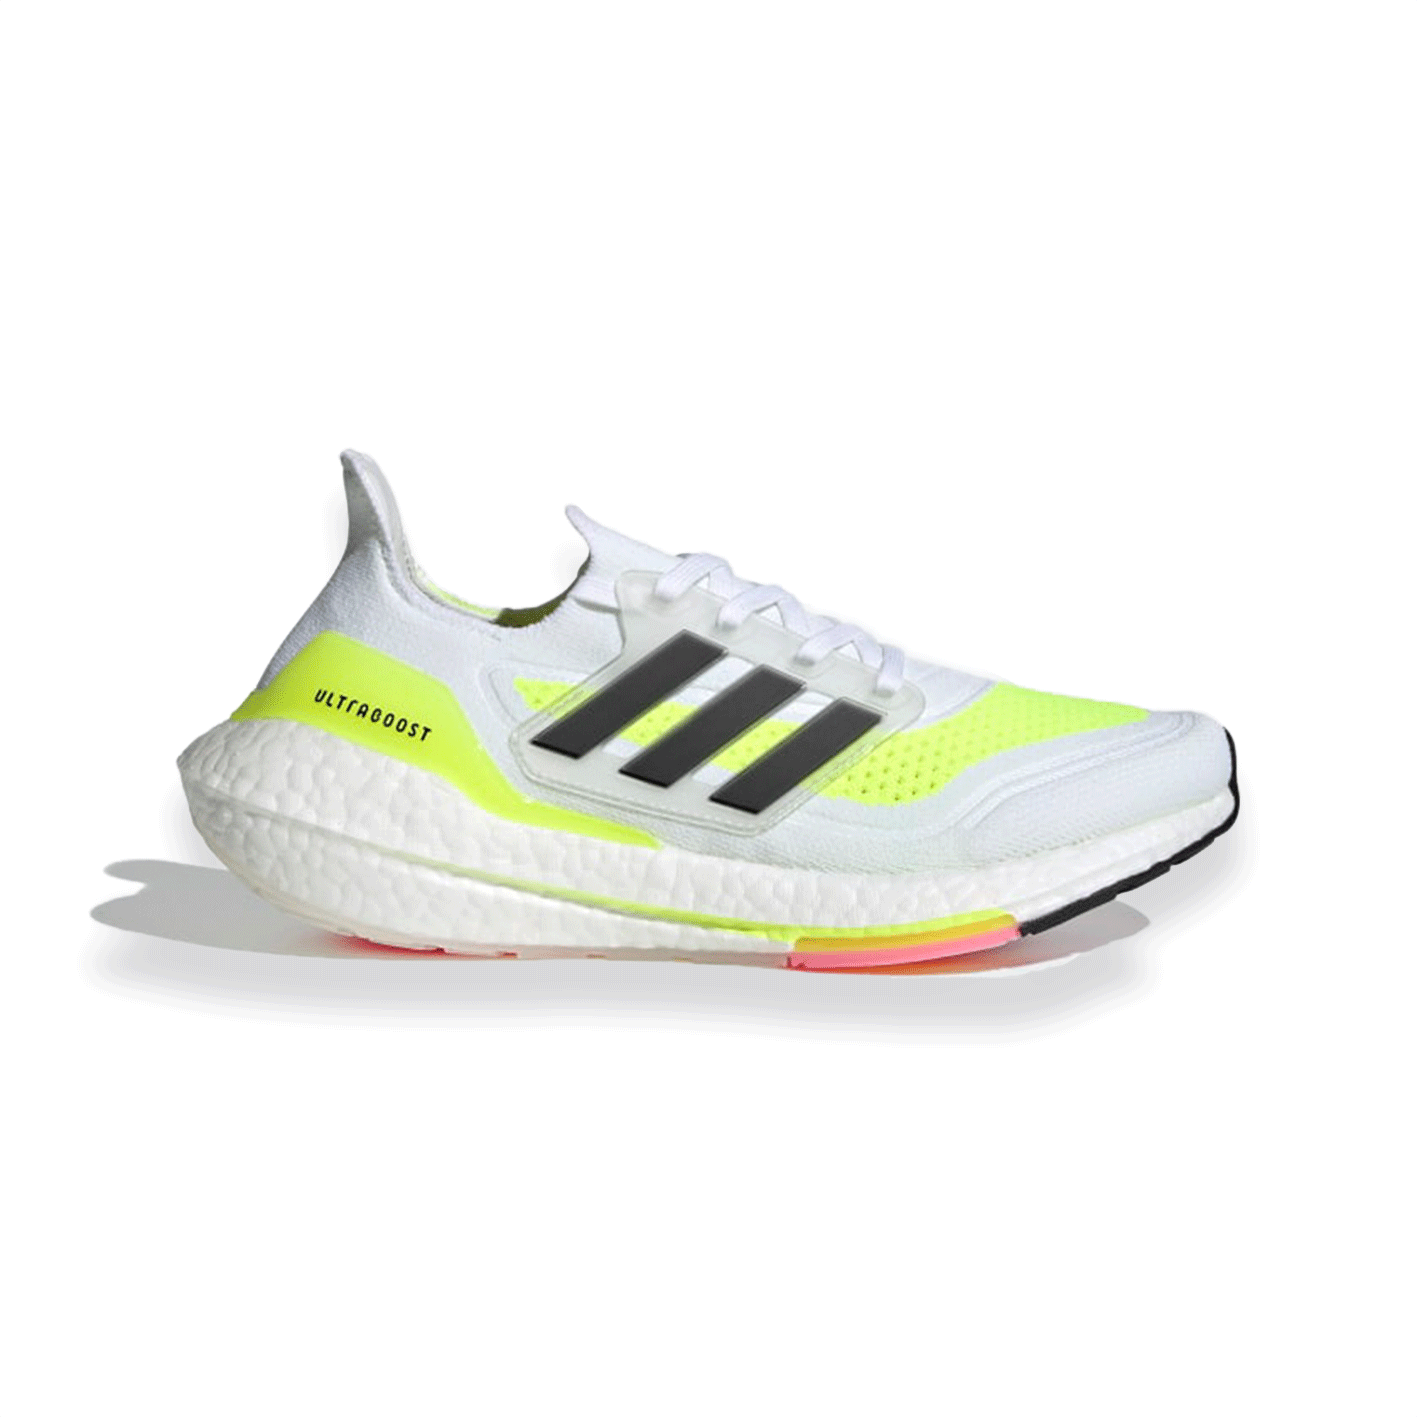 adidas best cushioned running shoes